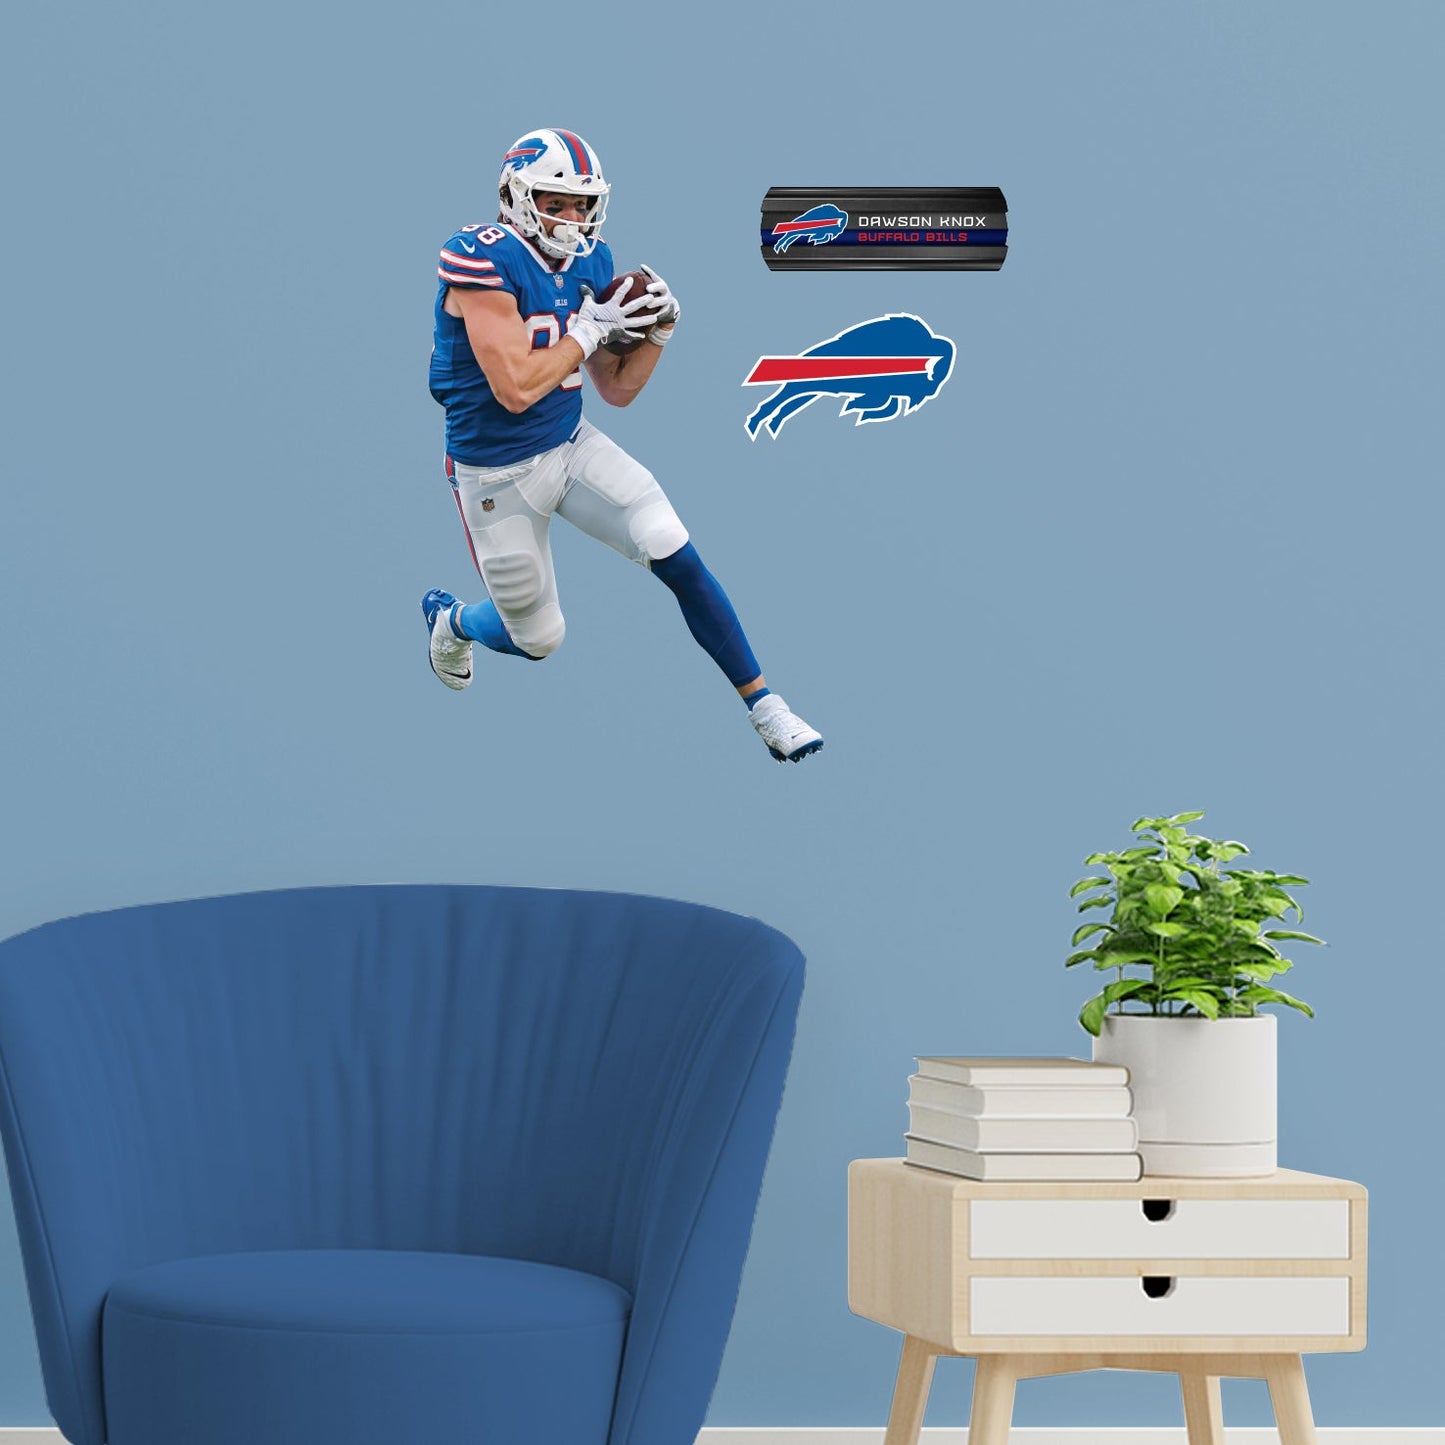 Buffalo Bills: Dawson Knox - Officially Licensed NFL Removable Adhesive Decal